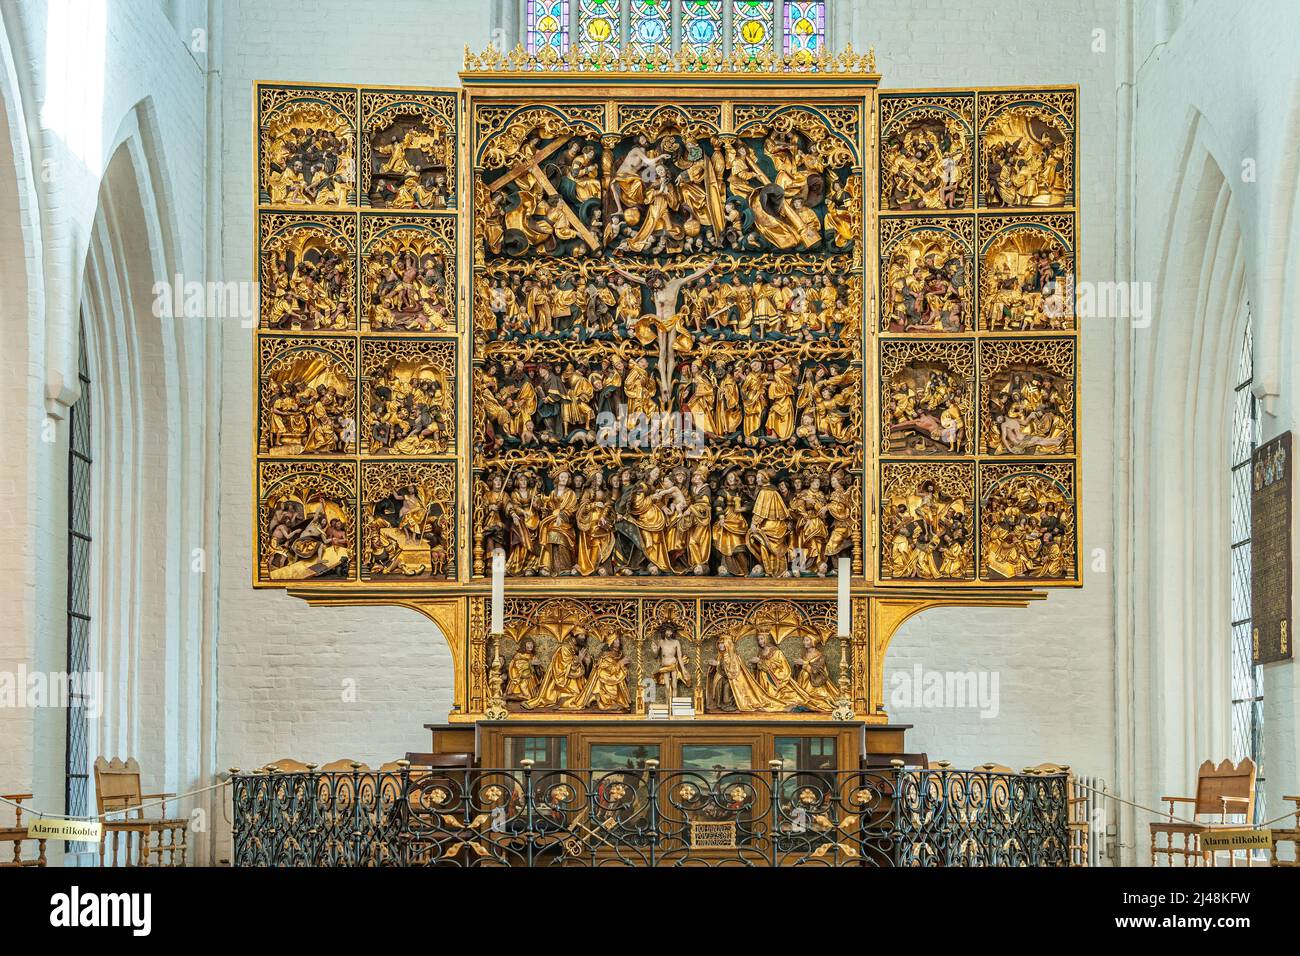 The altarpiece, representing the passion of Christ, in 23 carat gold leaf in the Cathedral of San Canuto in Odense. Odense, Fyn, Denmark, Europe Stock Photo